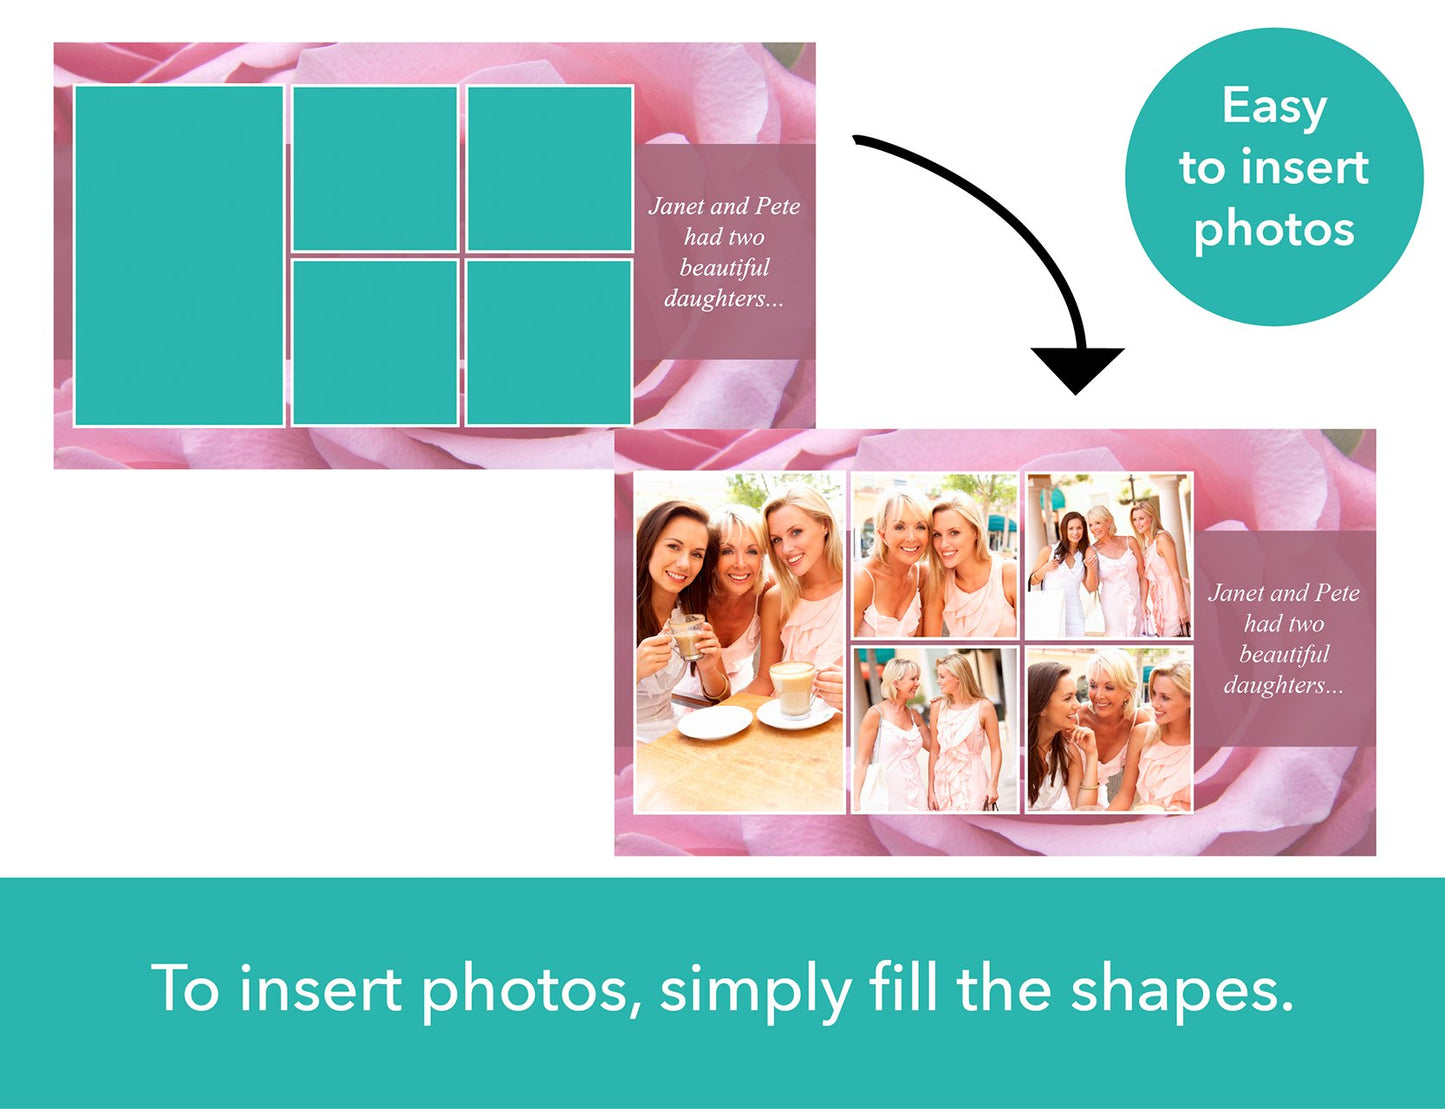 Pink Rose Funeral Slide Show Template